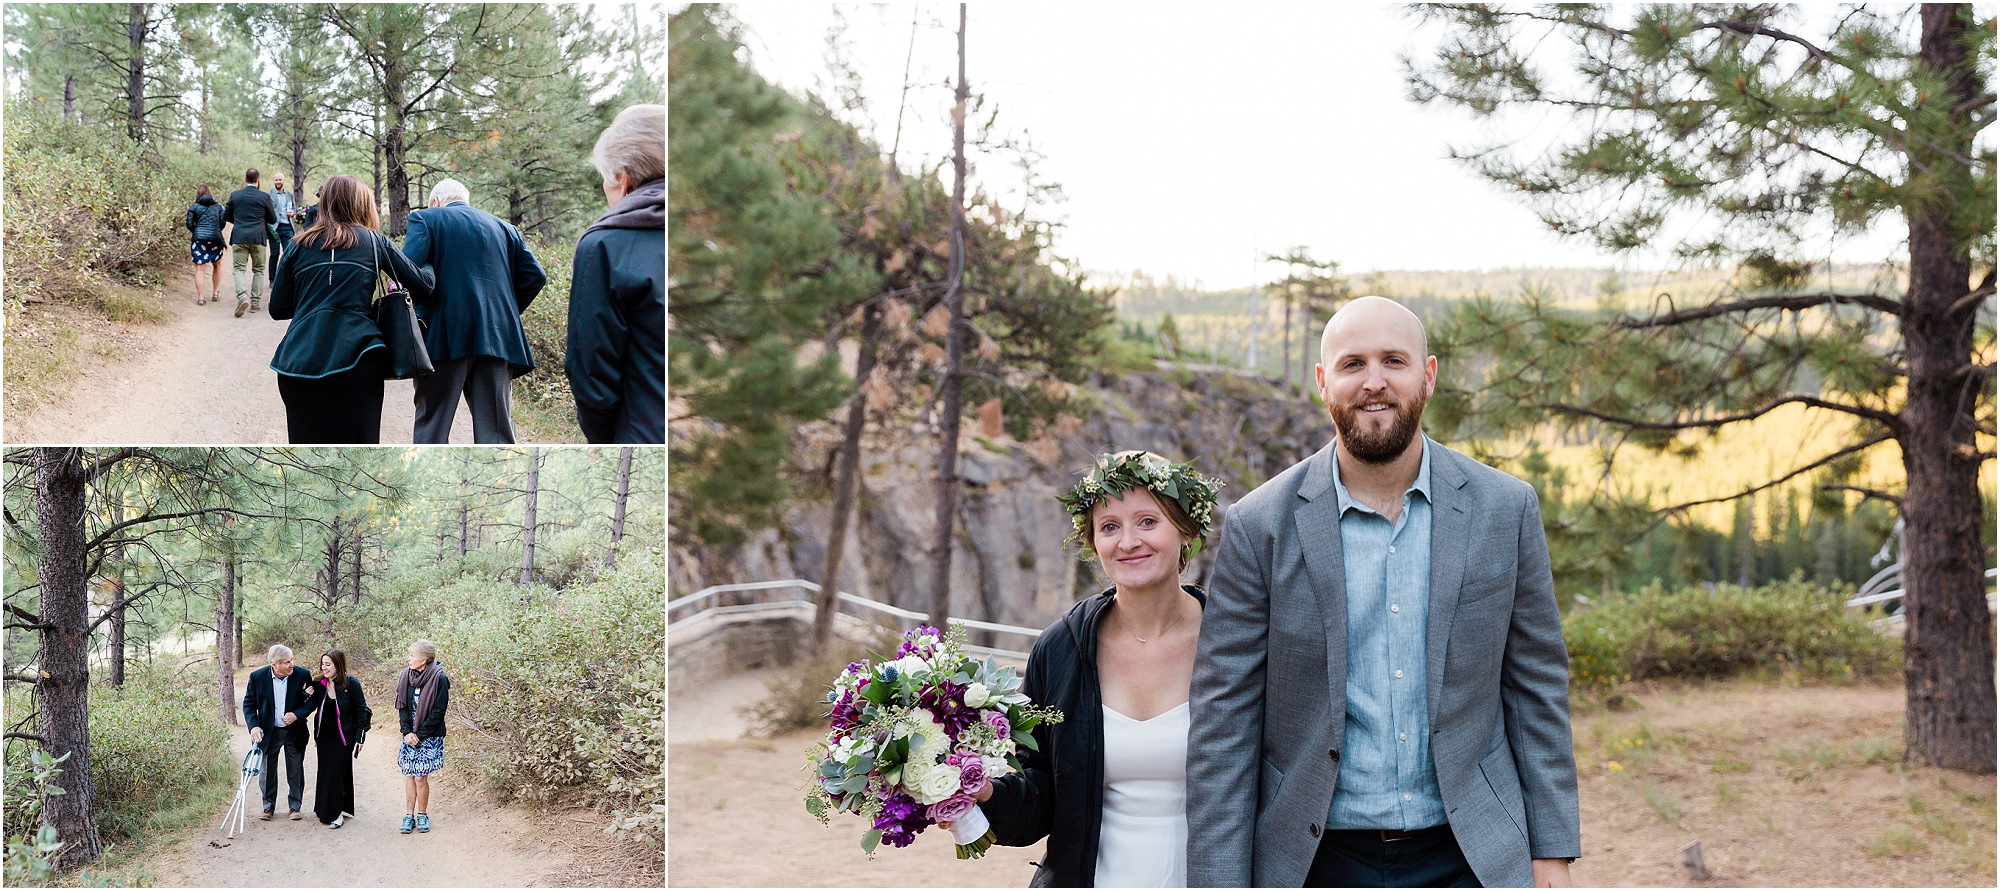 Hiking uphill with the bride & groom and a few guests to take formal portraits above Tumalo Falls in Bend, Oregon. | Erica Swantek Photography